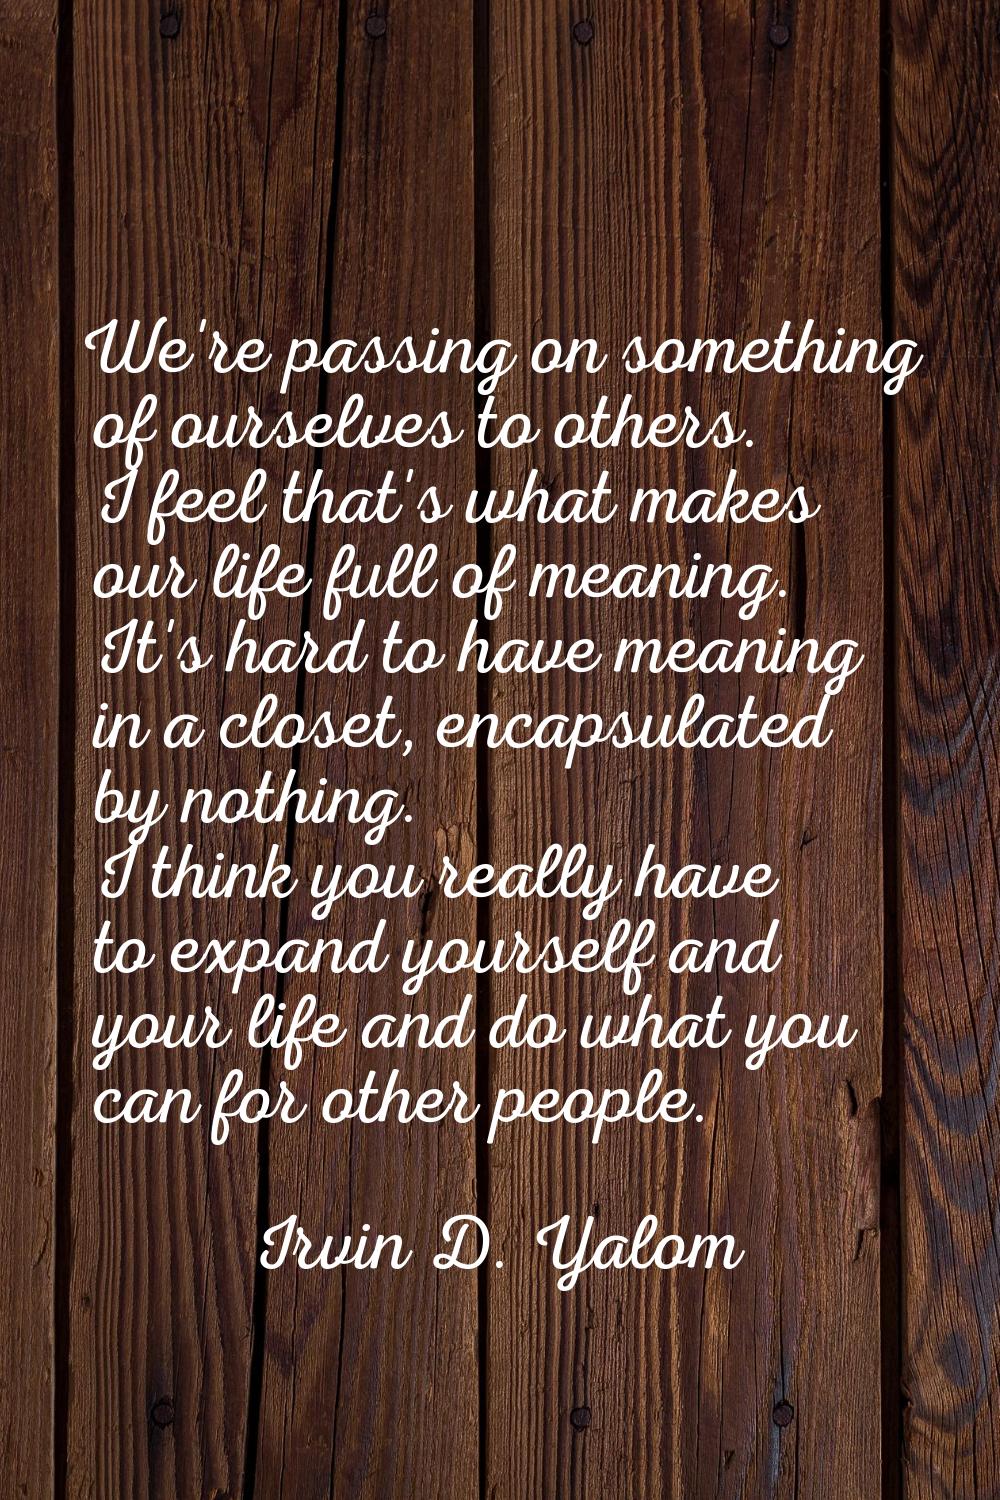 We're passing on something of ourselves to others. I feel that's what makes our life full of meanin